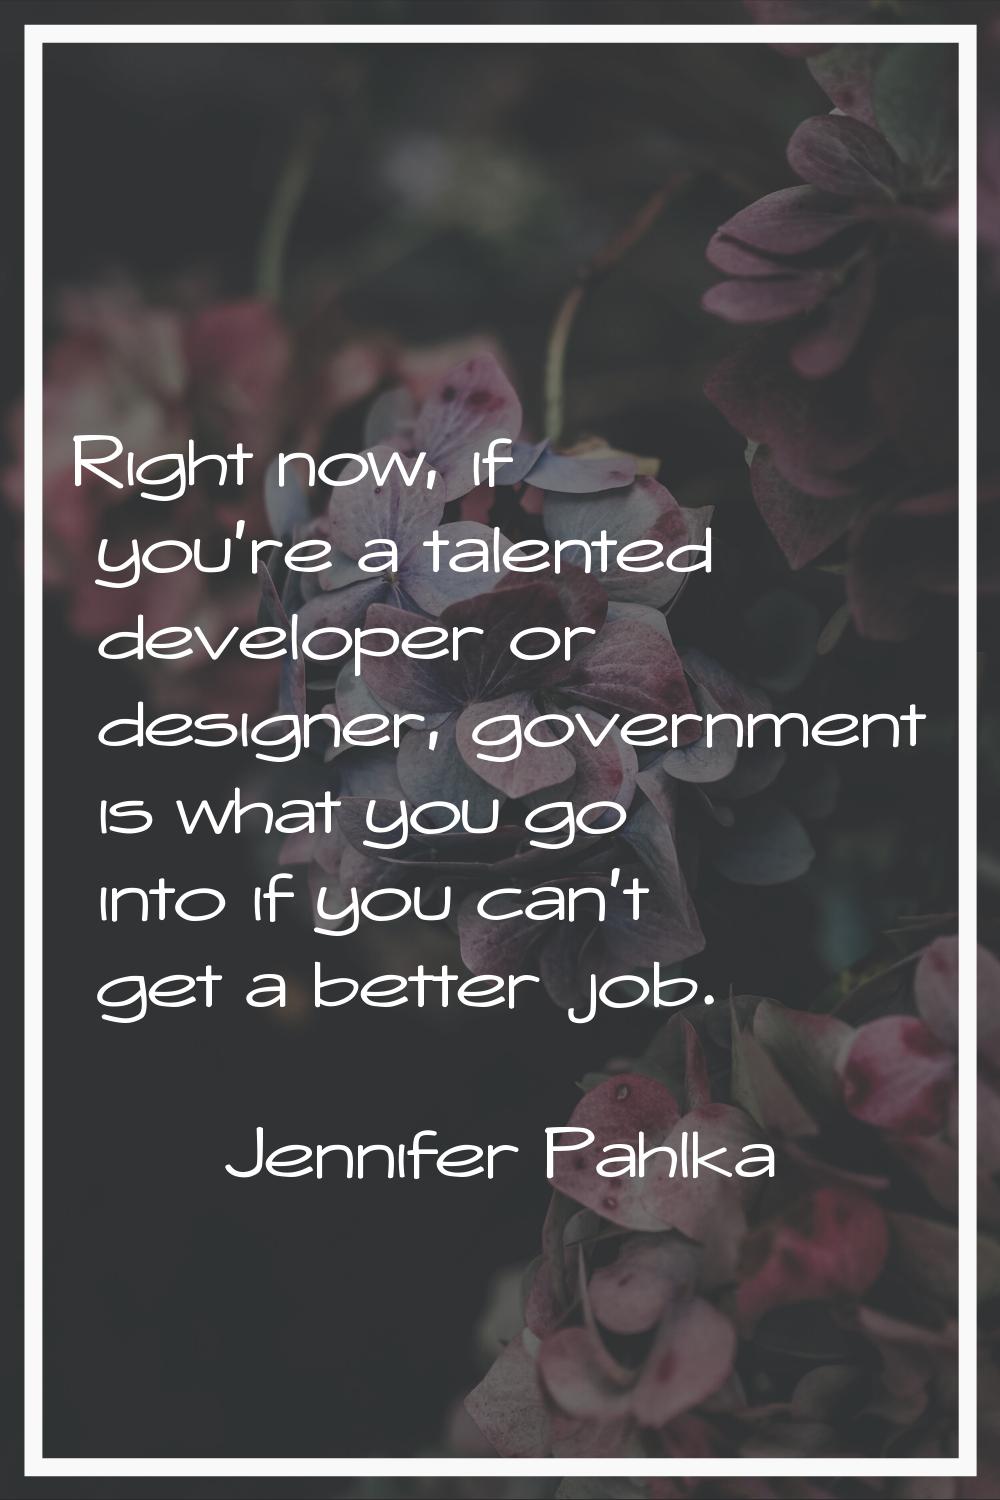 Right now, if you're a talented developer or designer, government is what you go into if you can't 